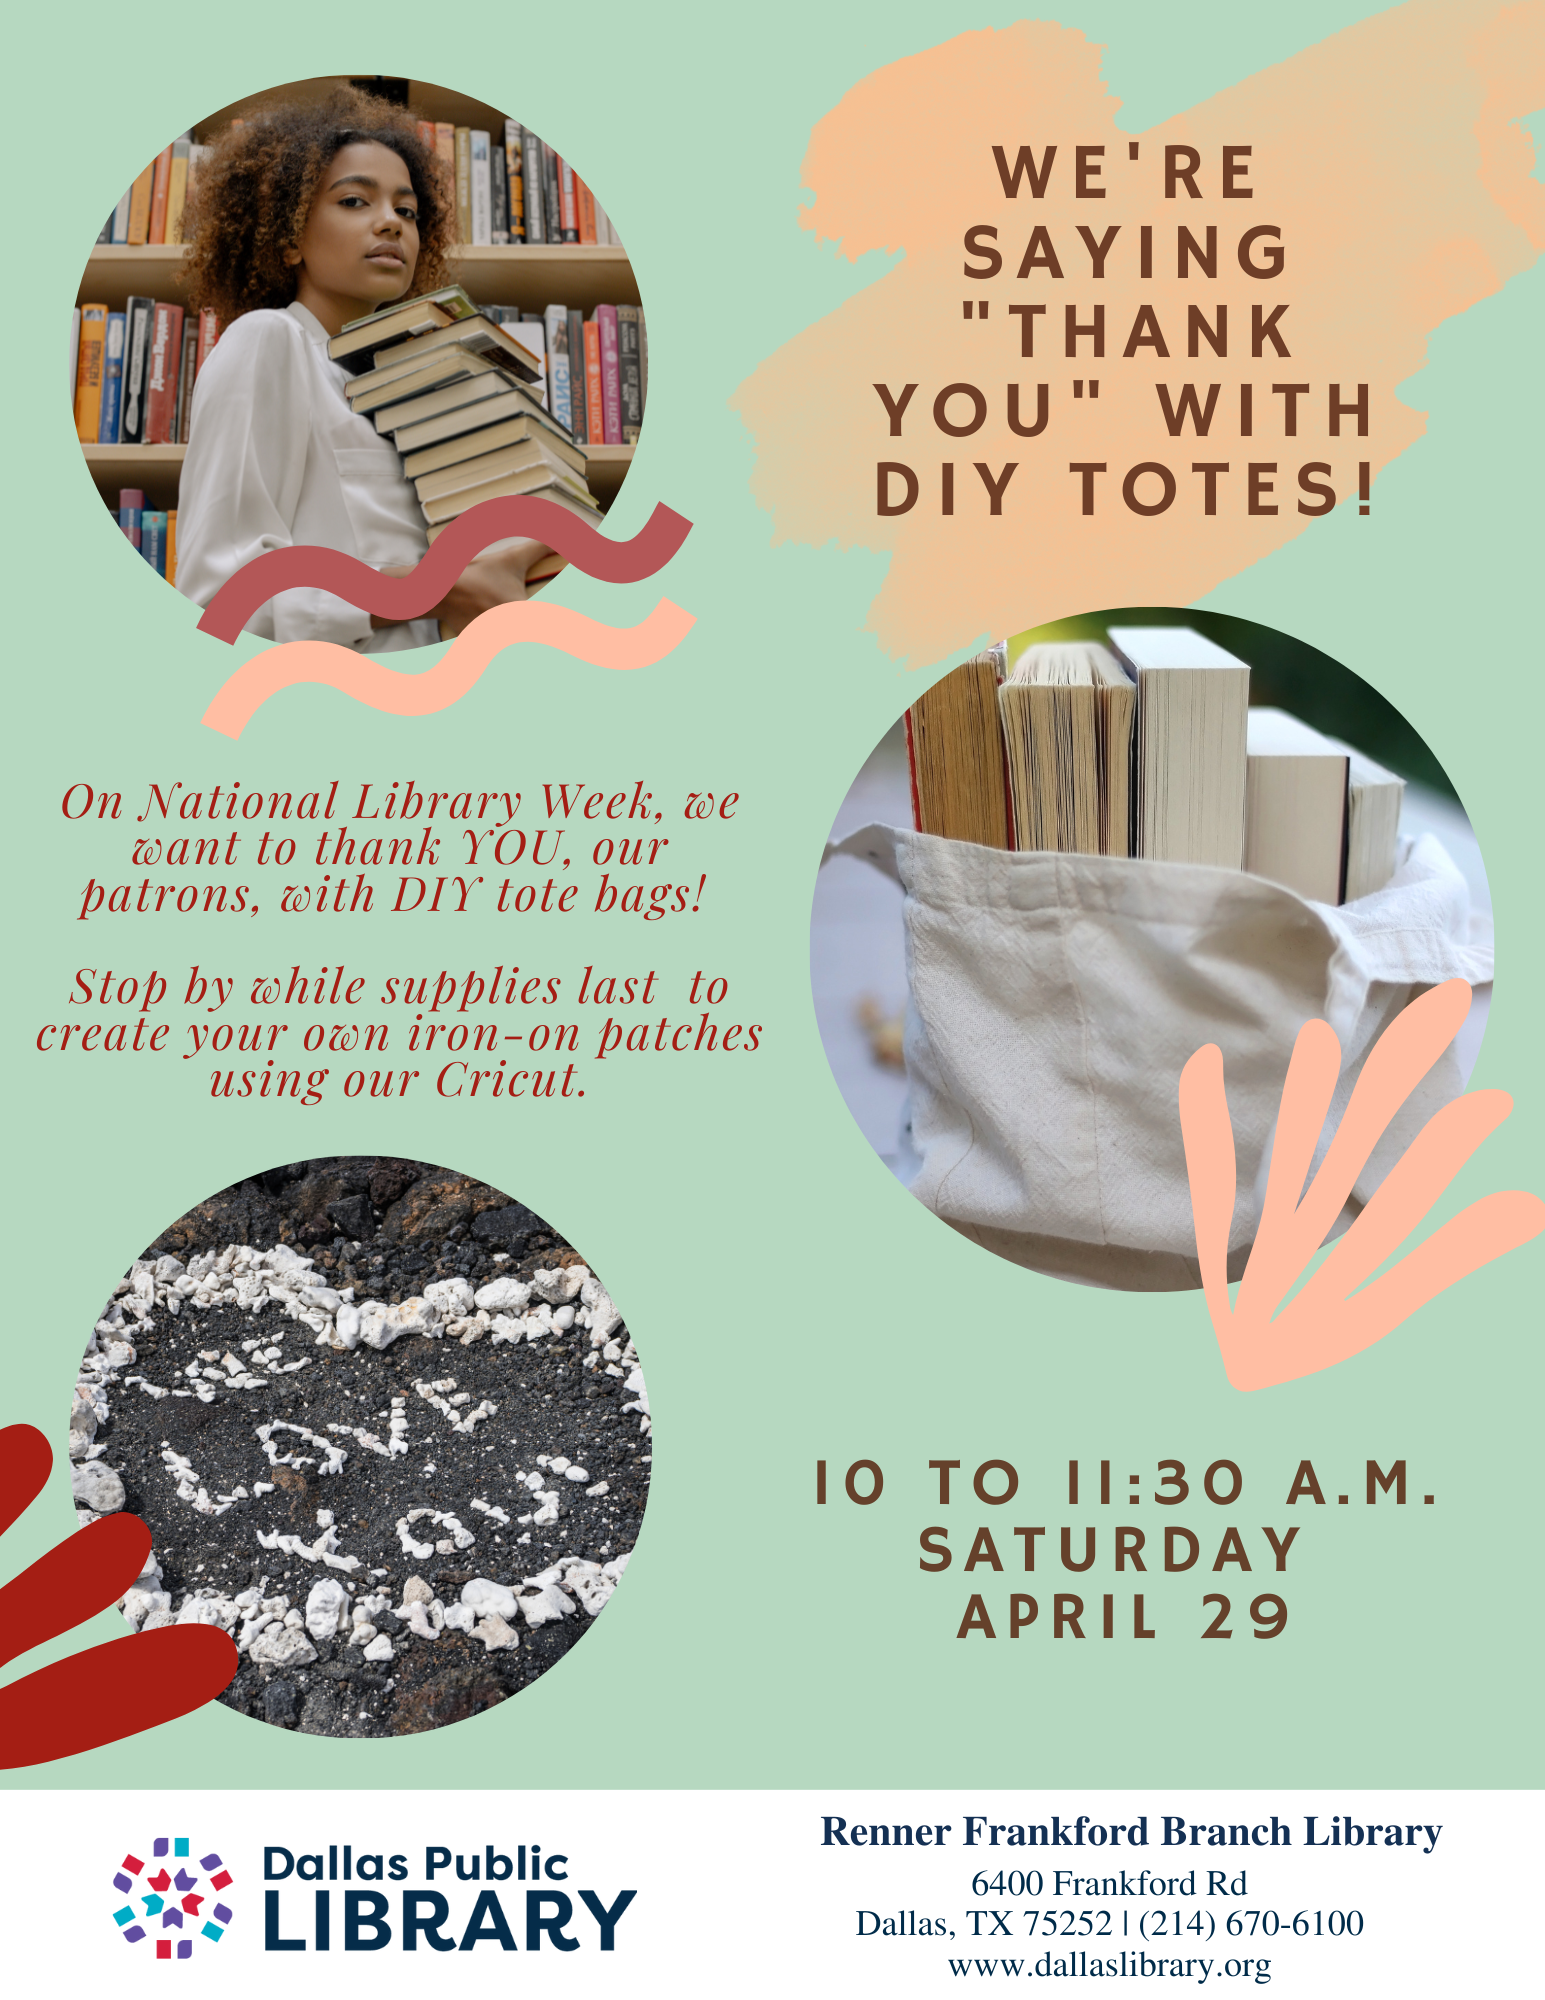 A green flyer with images of a woman carrying a stack of books, a tote bag filled with books, and a heart says "We're saying 'Thank you' with DIY totes!"